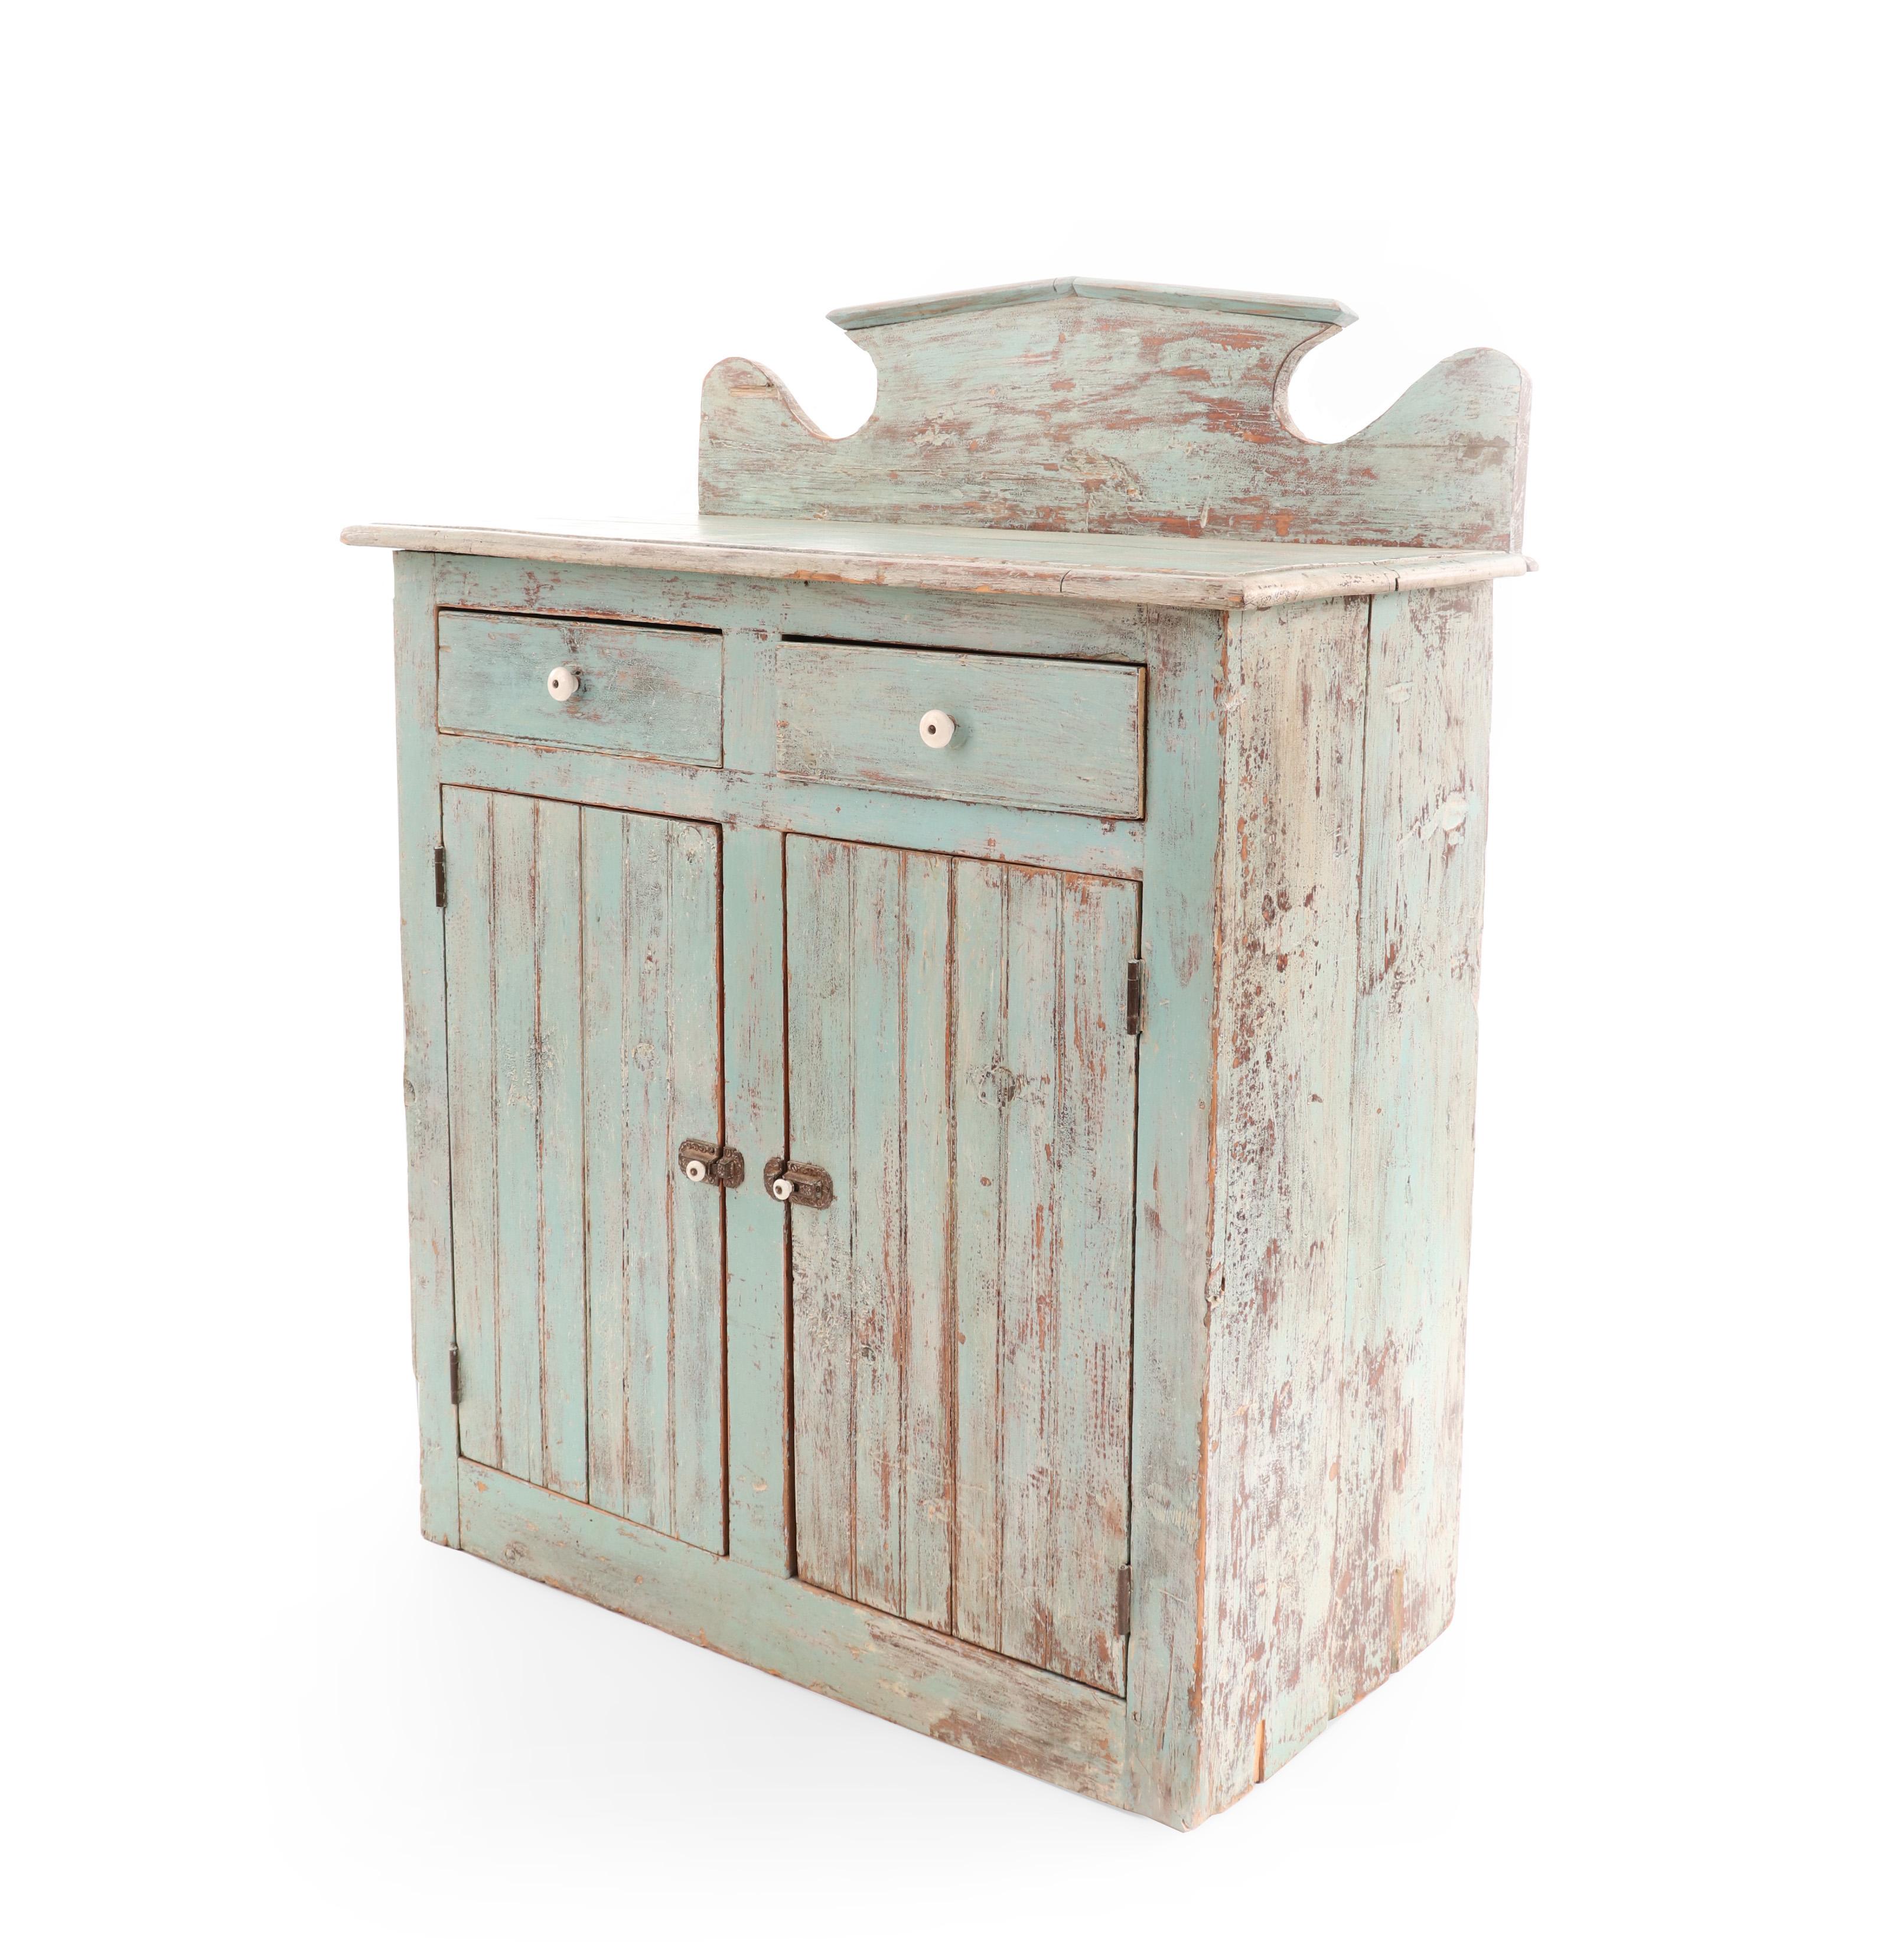 American country rustic blue painted wooden (Canadian / Ontario) cabinet with a back rail, two drawers with white ceramic pulls, above two cabinet doors.